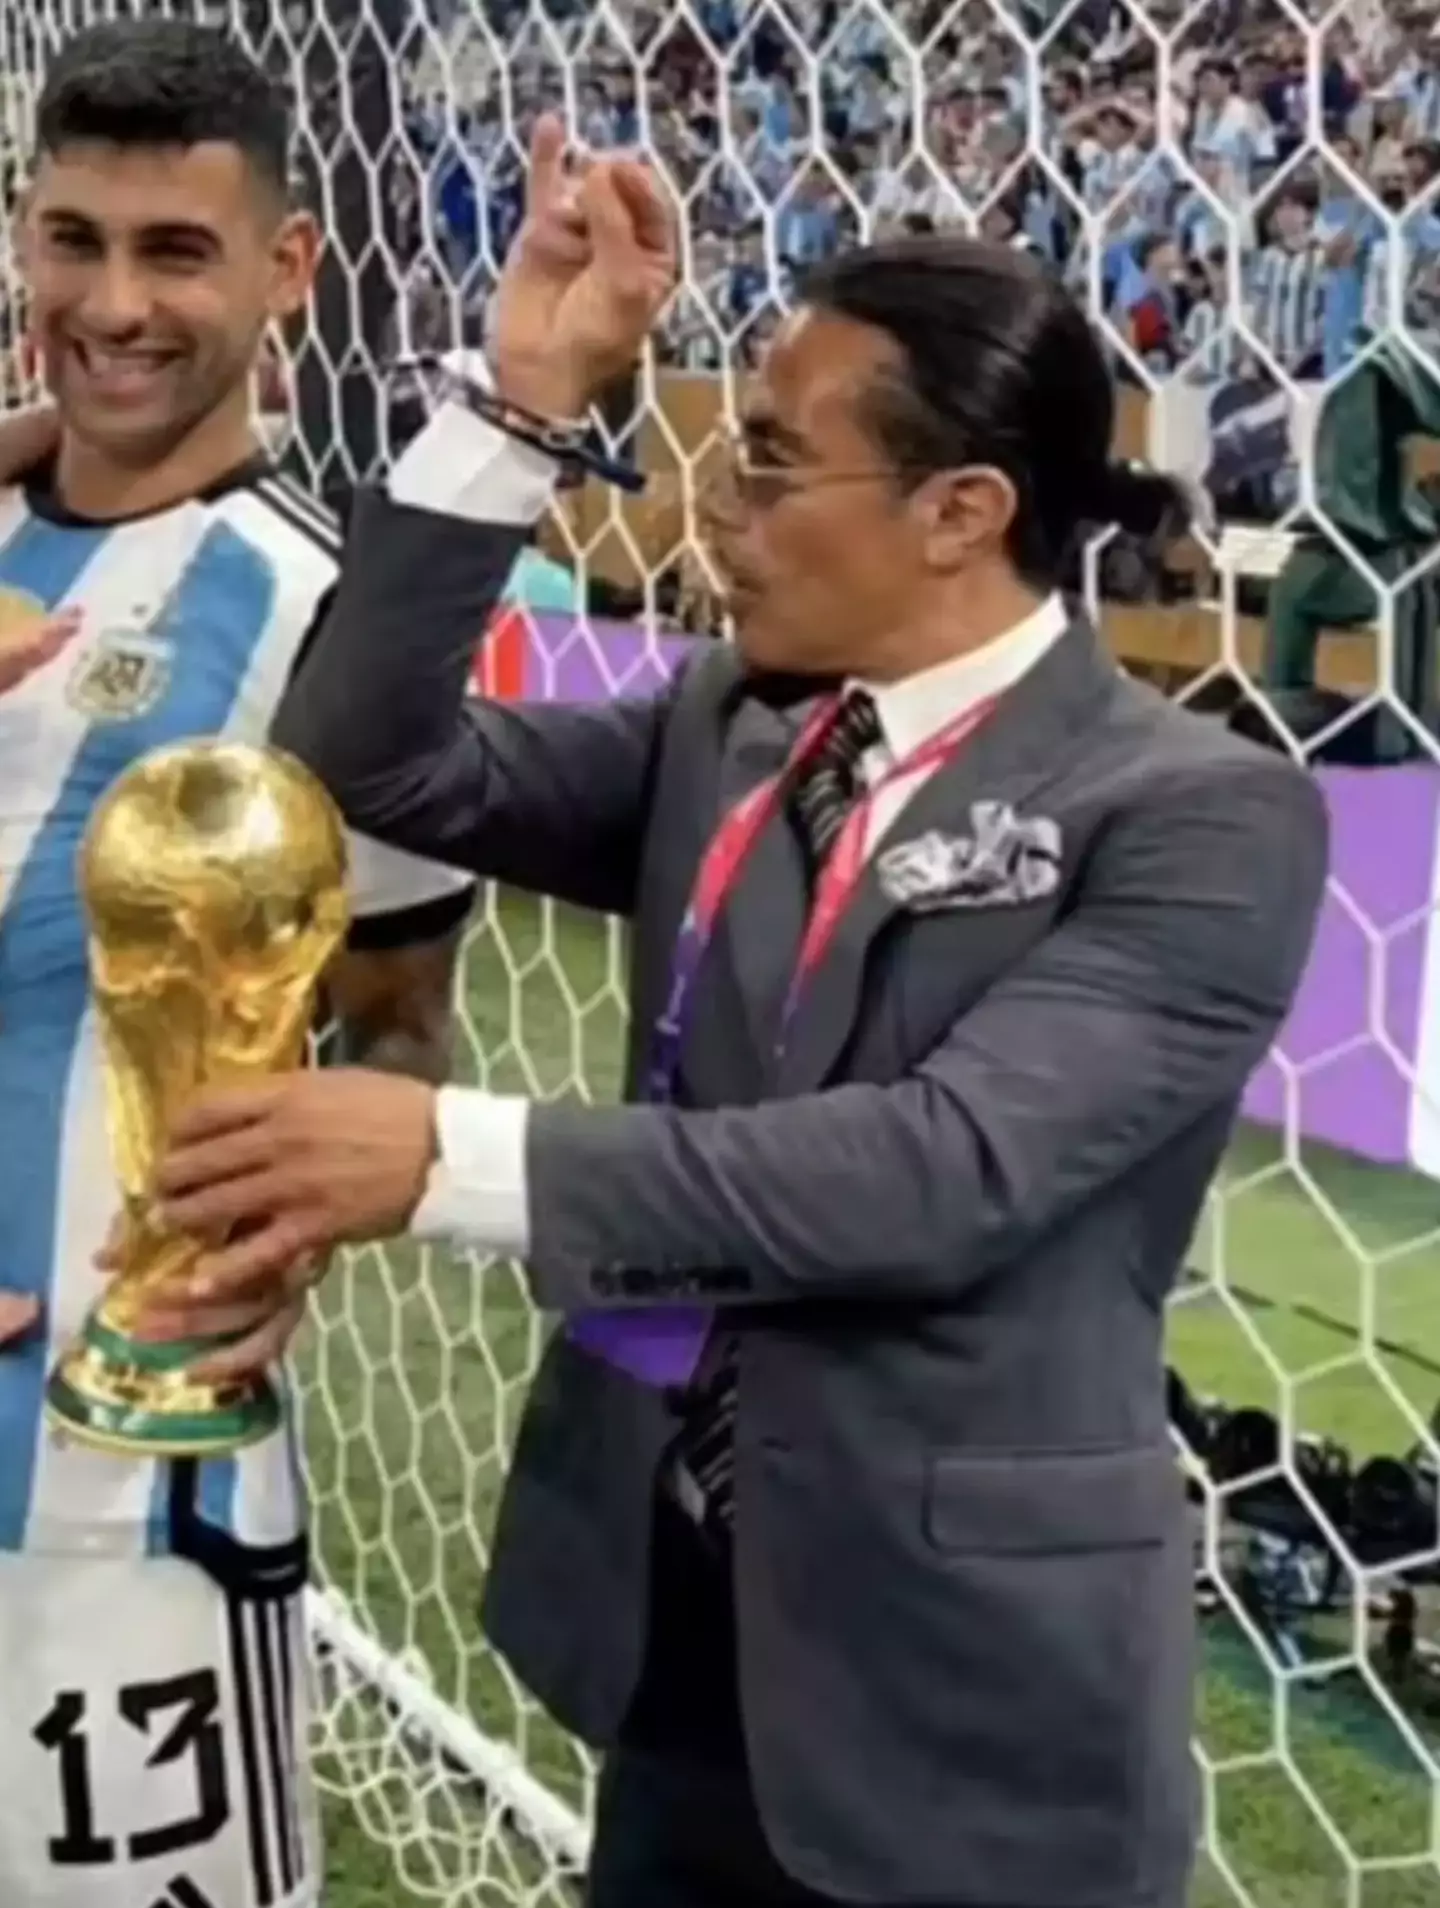 Salt Bae caused a lot of anger when he walked onto the pitch after Argentina's victory at the 2022 World Cup and handled the World Cup trophy.